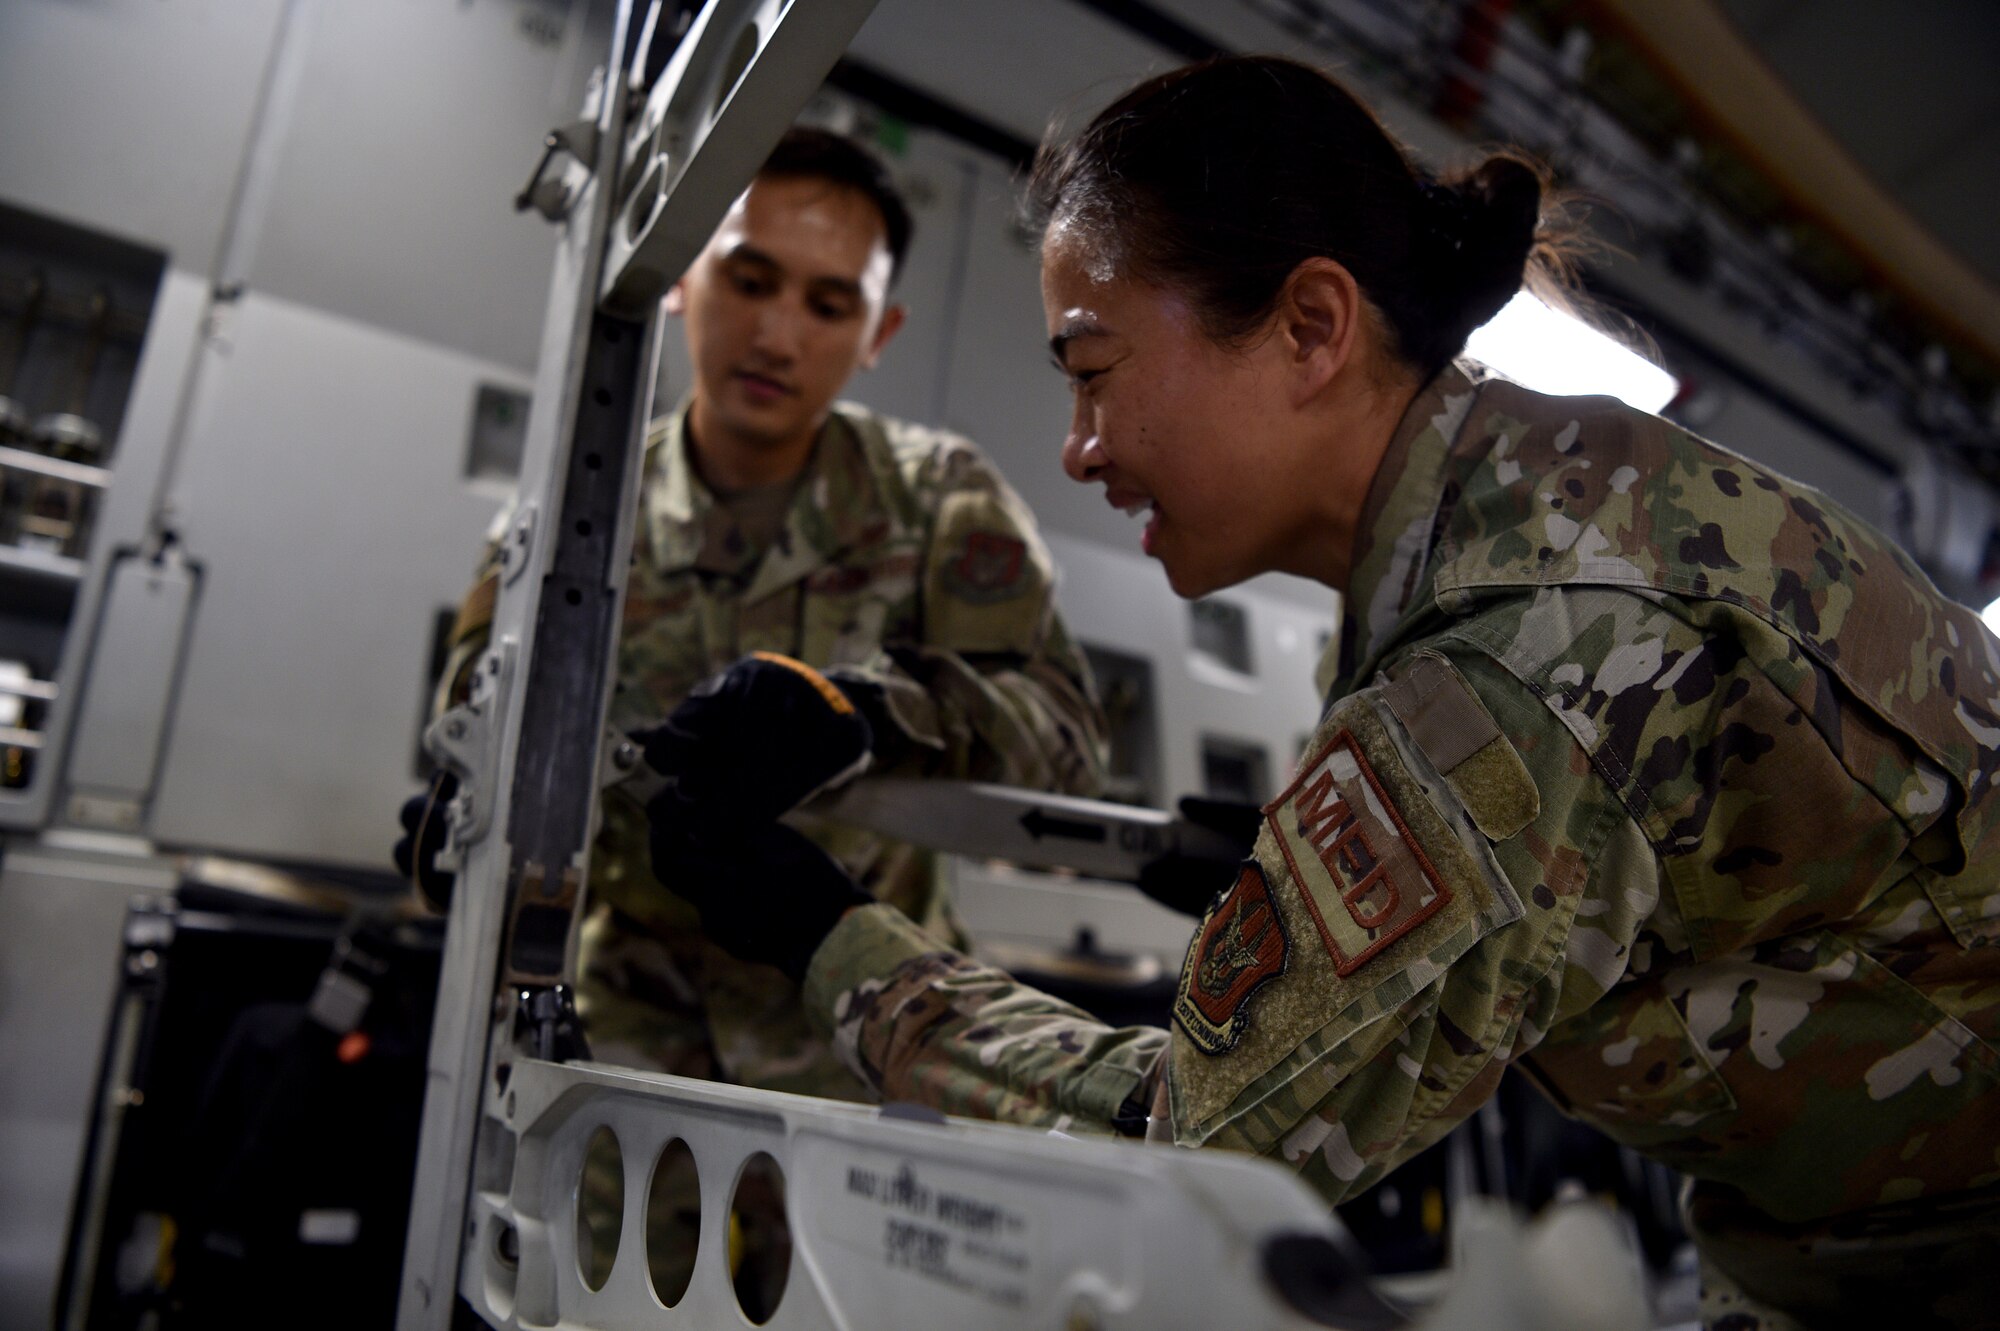 Captain John Penaranda, 624th Civil Engineer Squadron, and Capt. Louise Sarabosing, 624th Aeromedical Staging Squadron, prepare a C-17 for an aeromedical evacuation demonstration at Joint Base Pearl Harbor-Hickam, Hawaii, May 25, 2021. In honor of Asian American Pacific Islander Heritage Month, active duty, Air Force Reserve, and Air National Guard Airmen of Asian American and Pacific Islander descent came together to demonstrate Air Force capabilities for University of Hawaii ROTC cadets. (U.S. Air Force photo by 1st Lt. Amber R. Kelly-Herard)